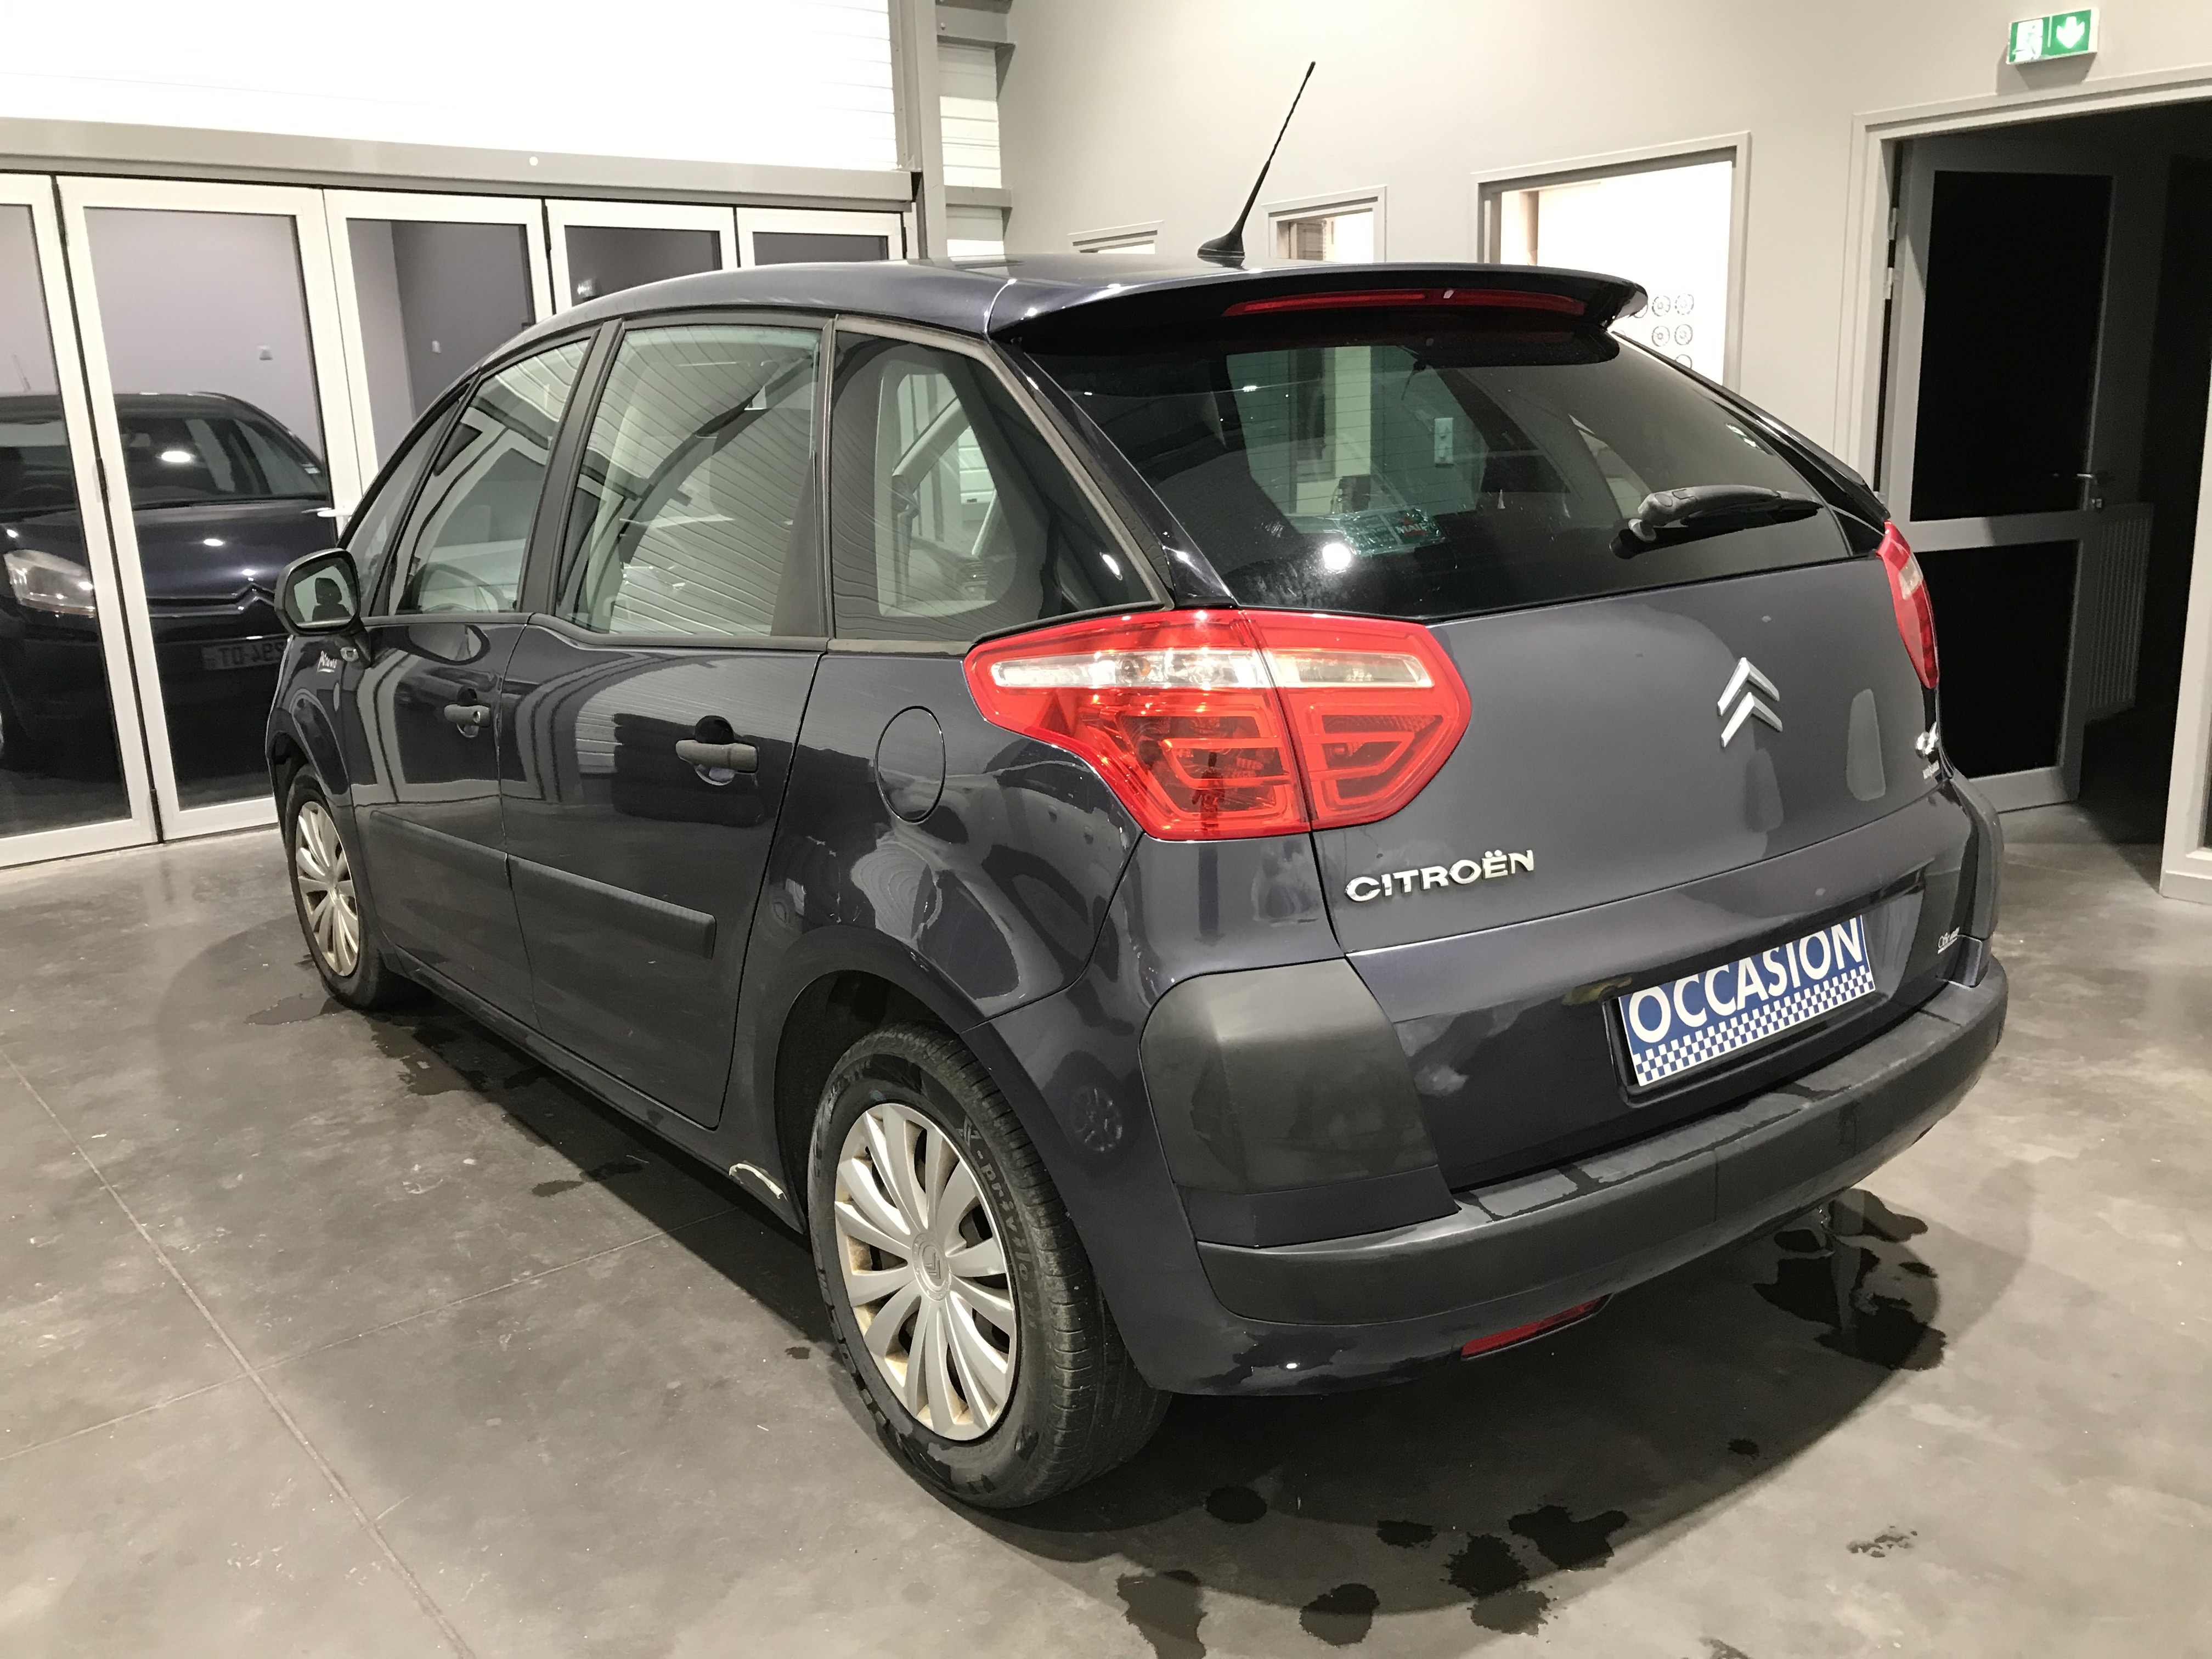 CITROËN C4 PICASSO PACK AMBIANCE 1.6 HDI 110 ch Saint